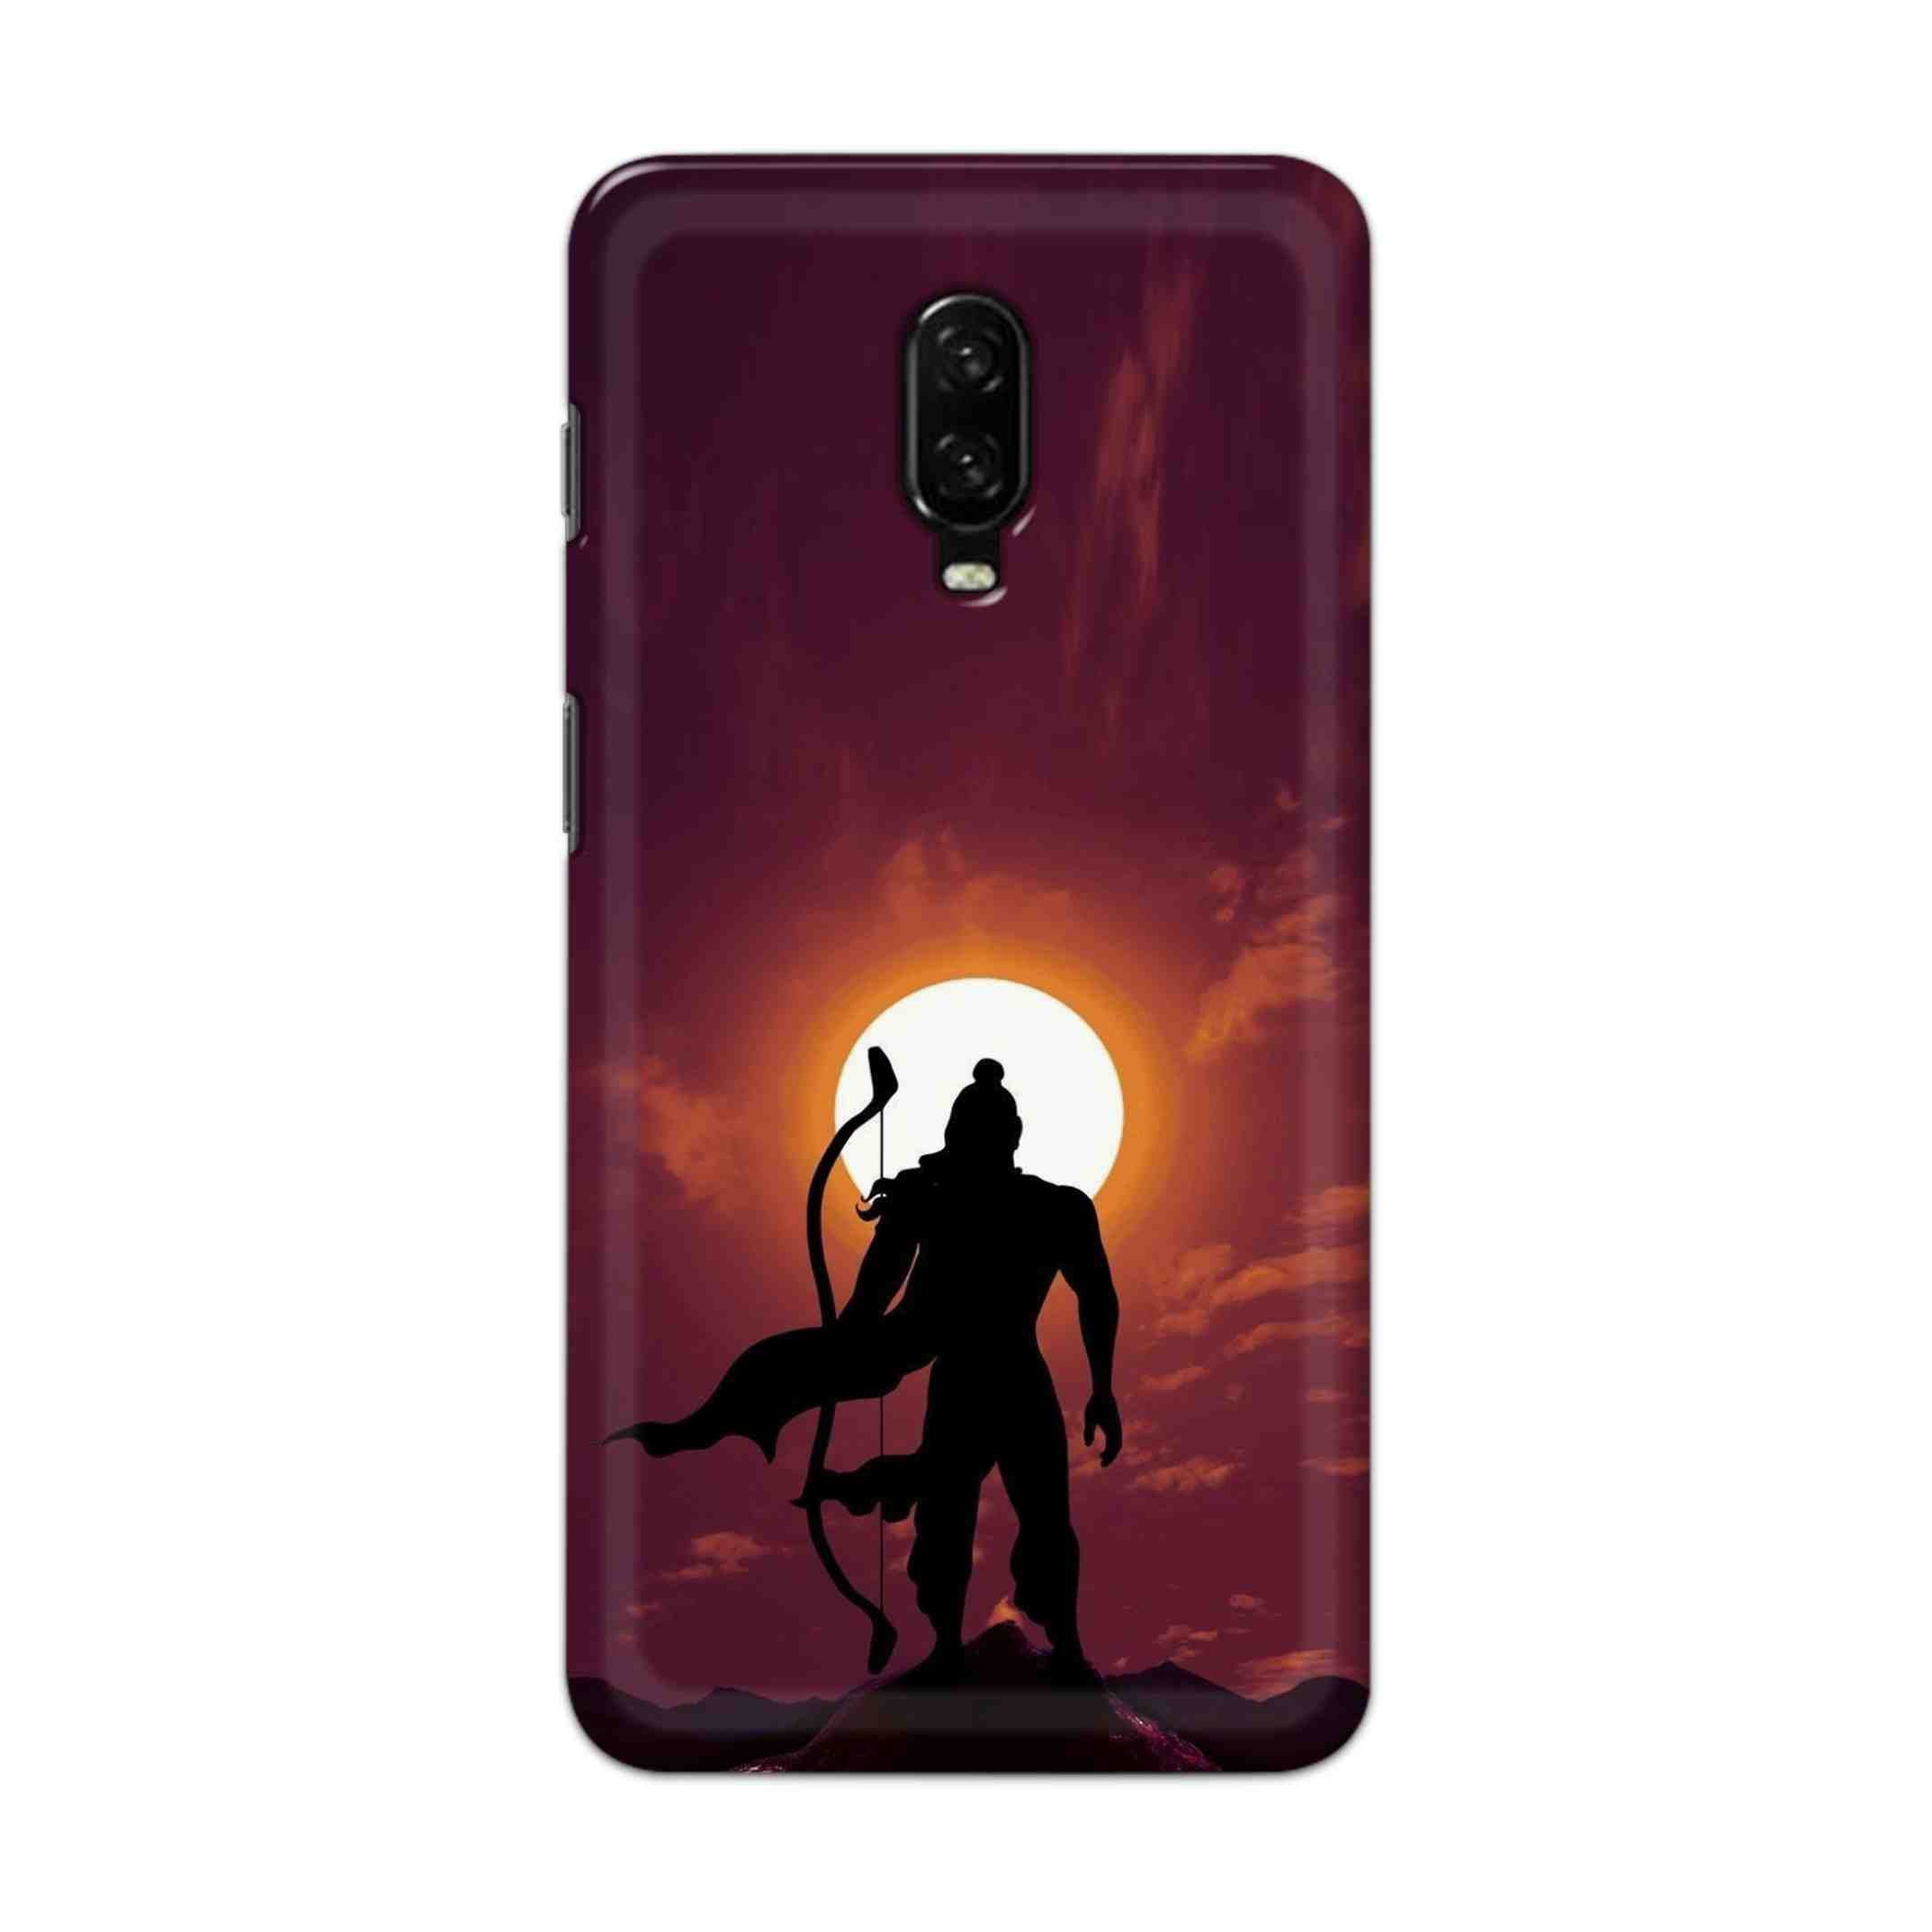 Buy Ram Hard Back Mobile Phone Case Cover For OnePlus 6T Online